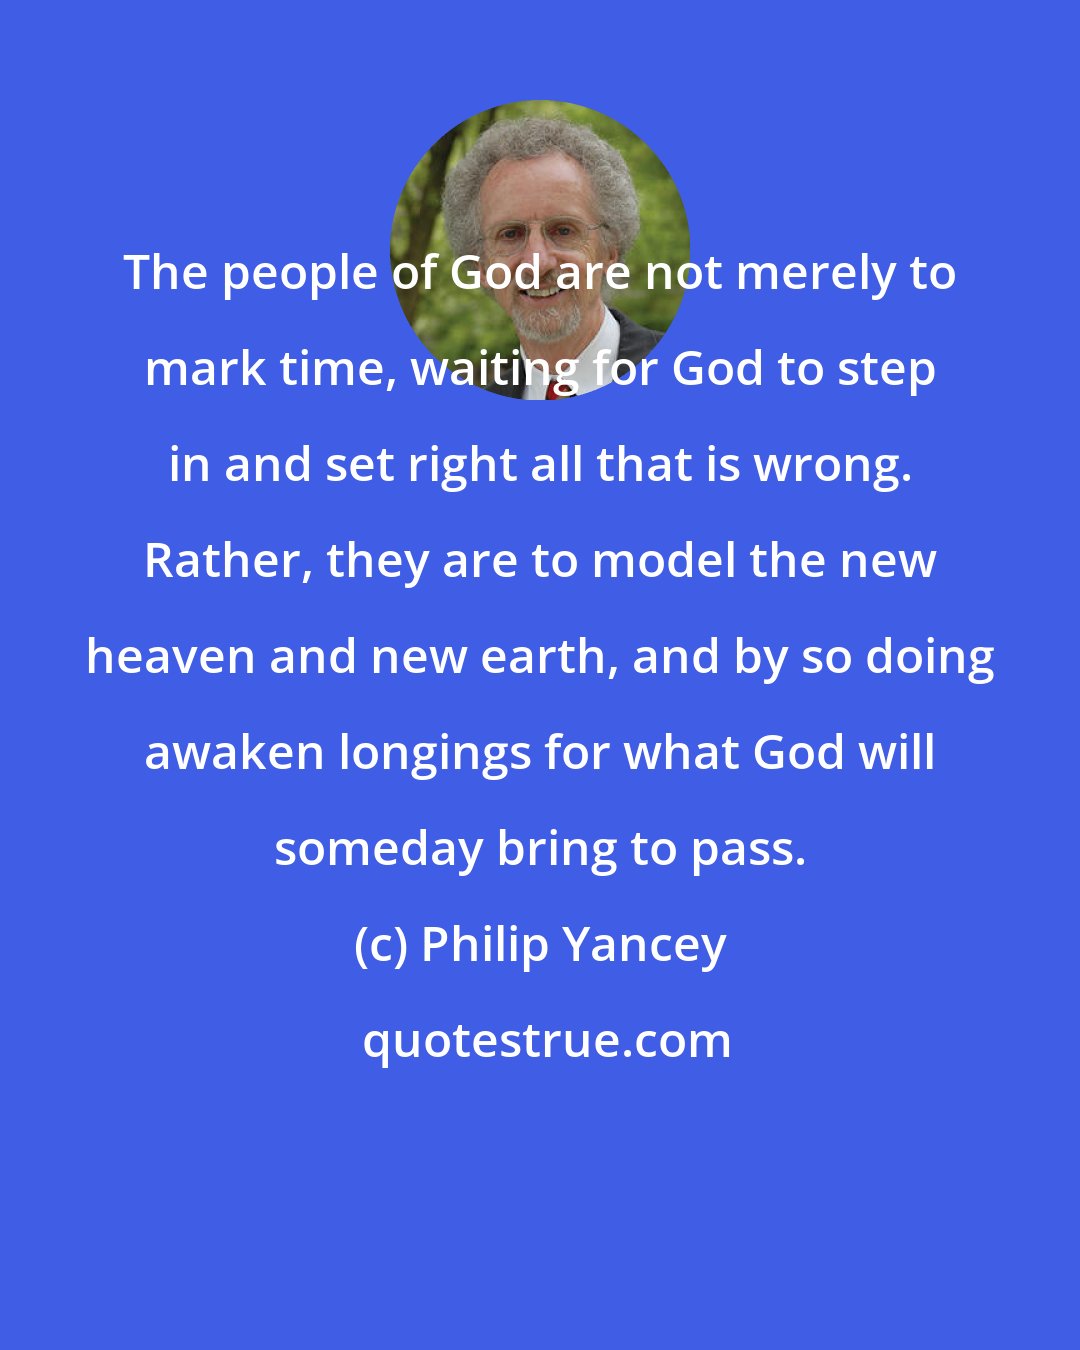 Philip Yancey: The people of God are not merely to mark time, waiting for God to step in and set right all that is wrong. Rather, they are to model the new heaven and new earth, and by so doing awaken longings for what God will someday bring to pass.